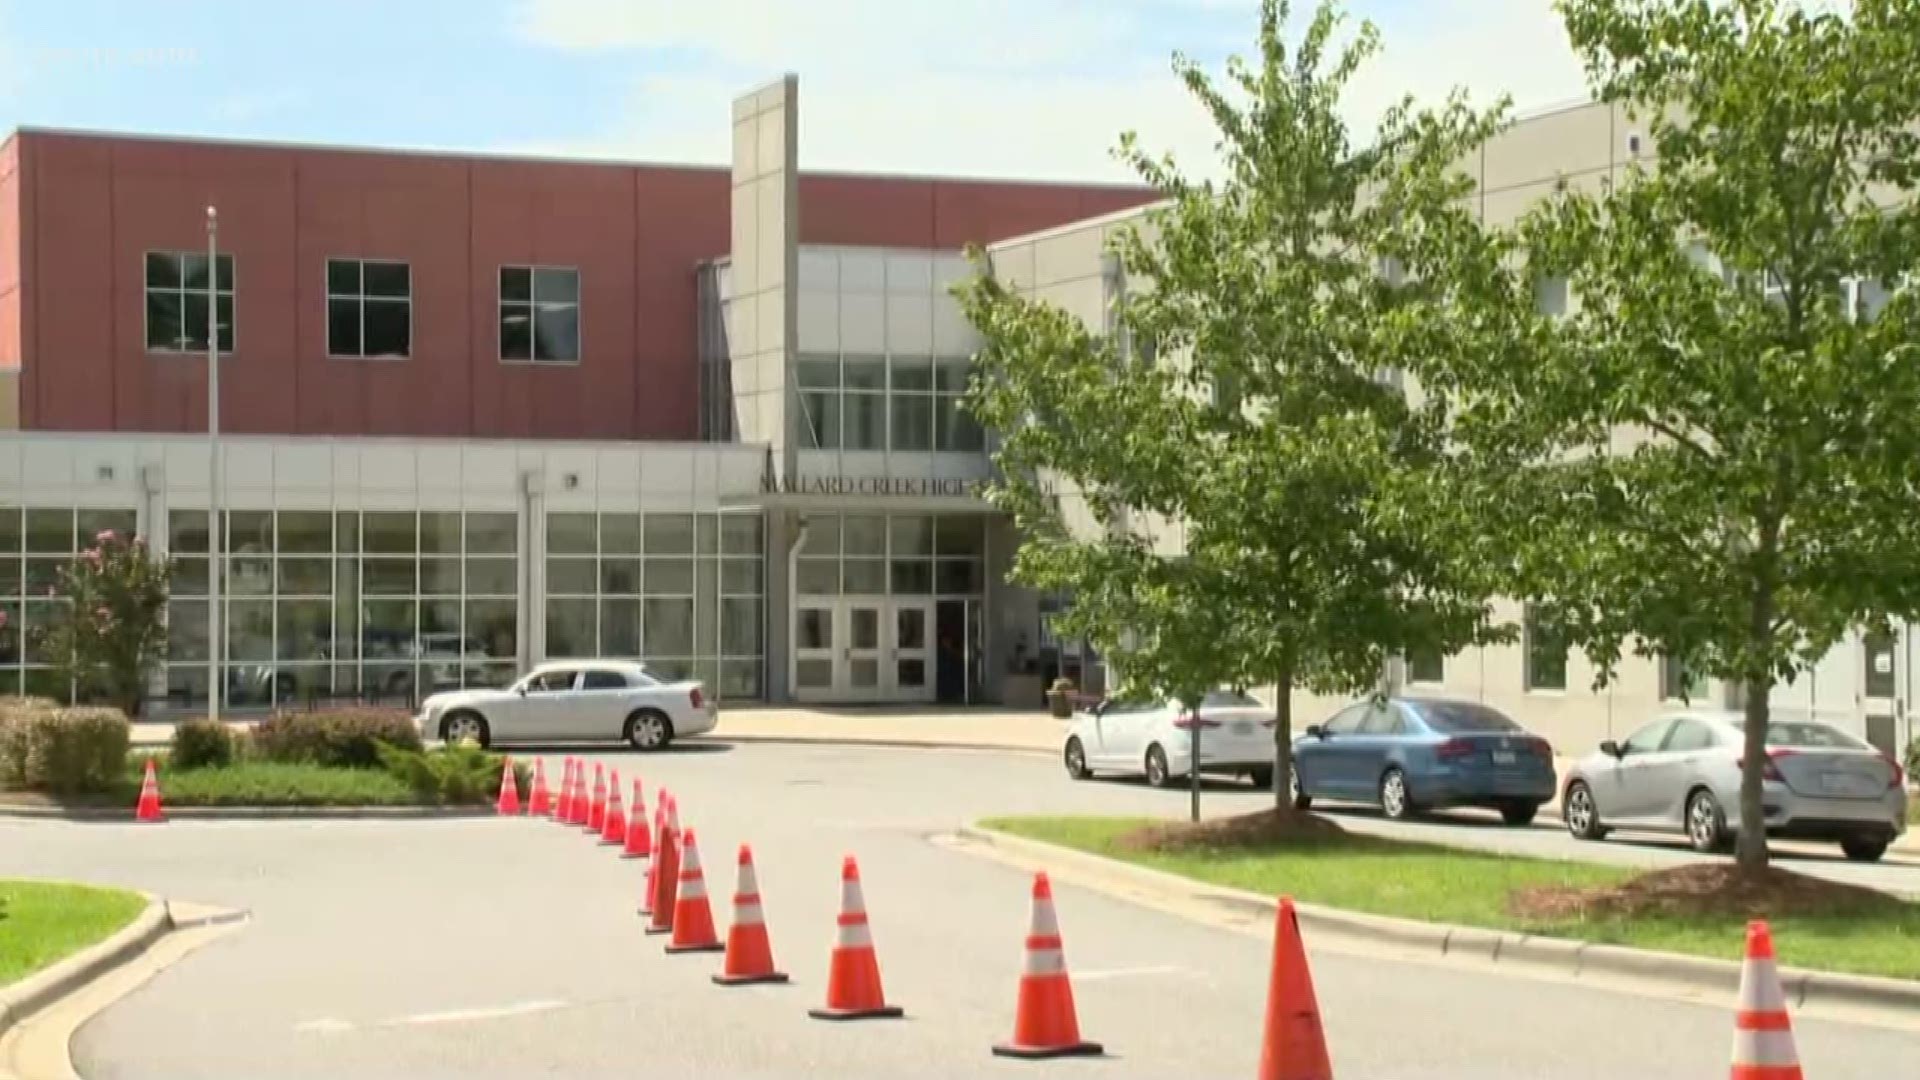 Over a dozen school districts returned to the classroom Monday, and for Charlotte-Mecklenburg Schools, the focus is on safety and learning.